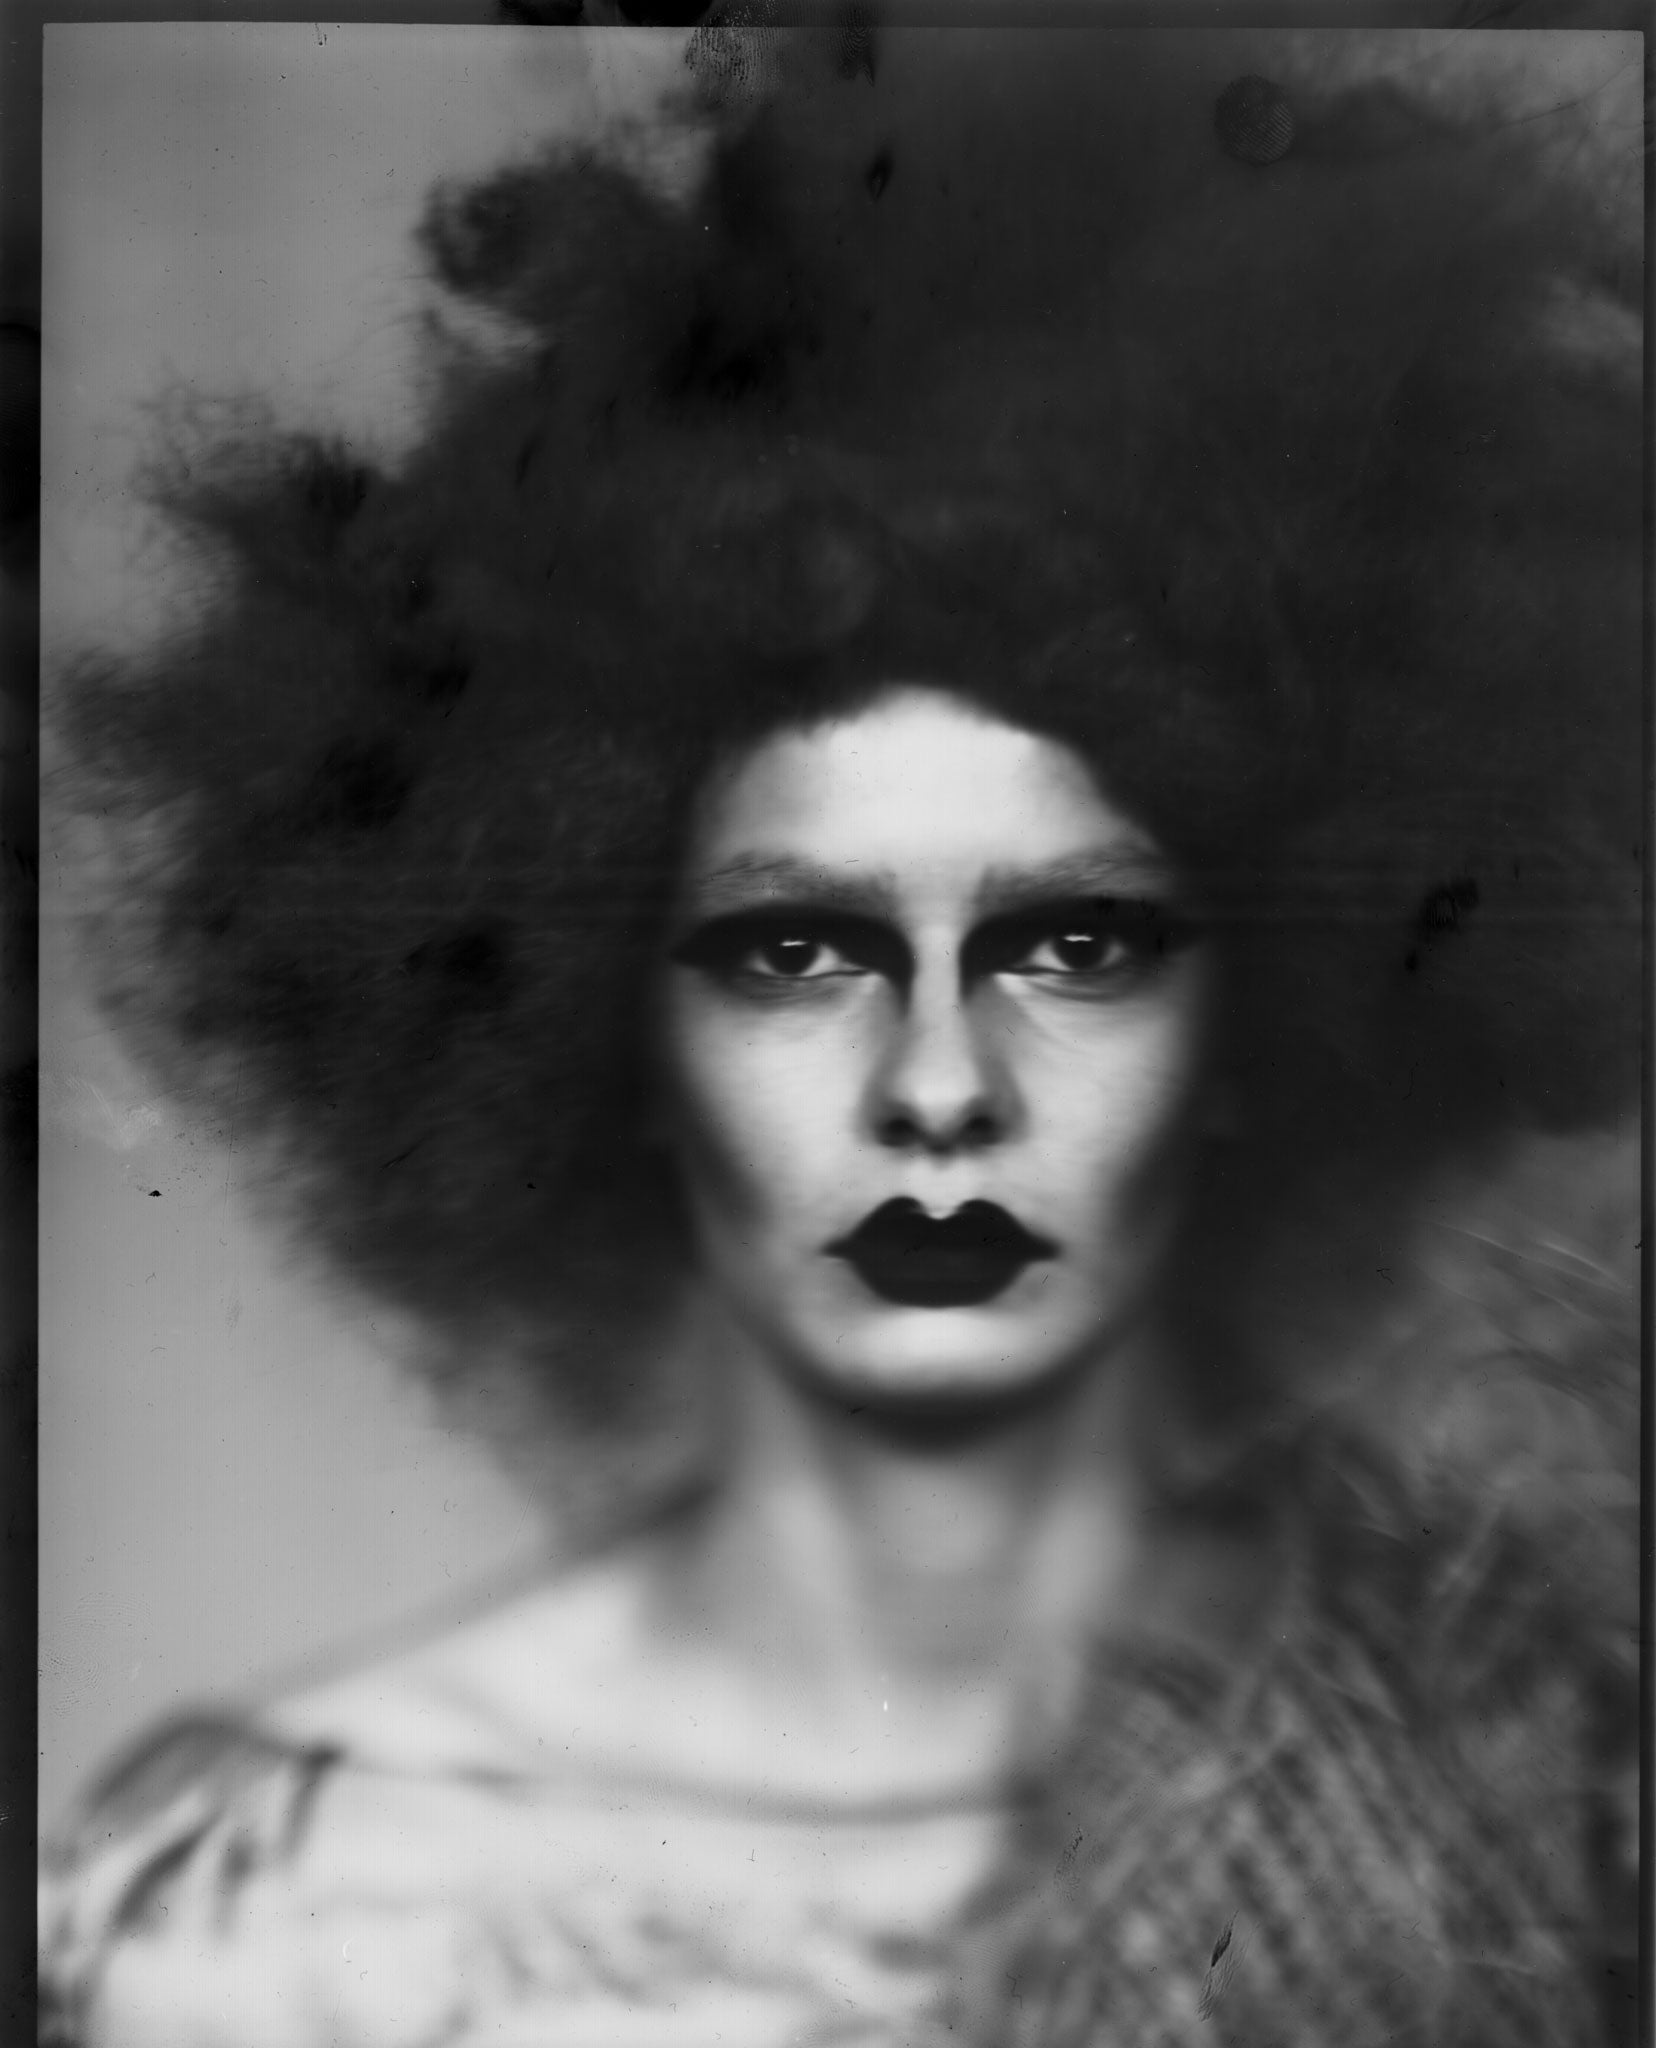 Deconstructed and reconstructed: Walter and Zoniel's fashion images were shot on a lens created in around 1880